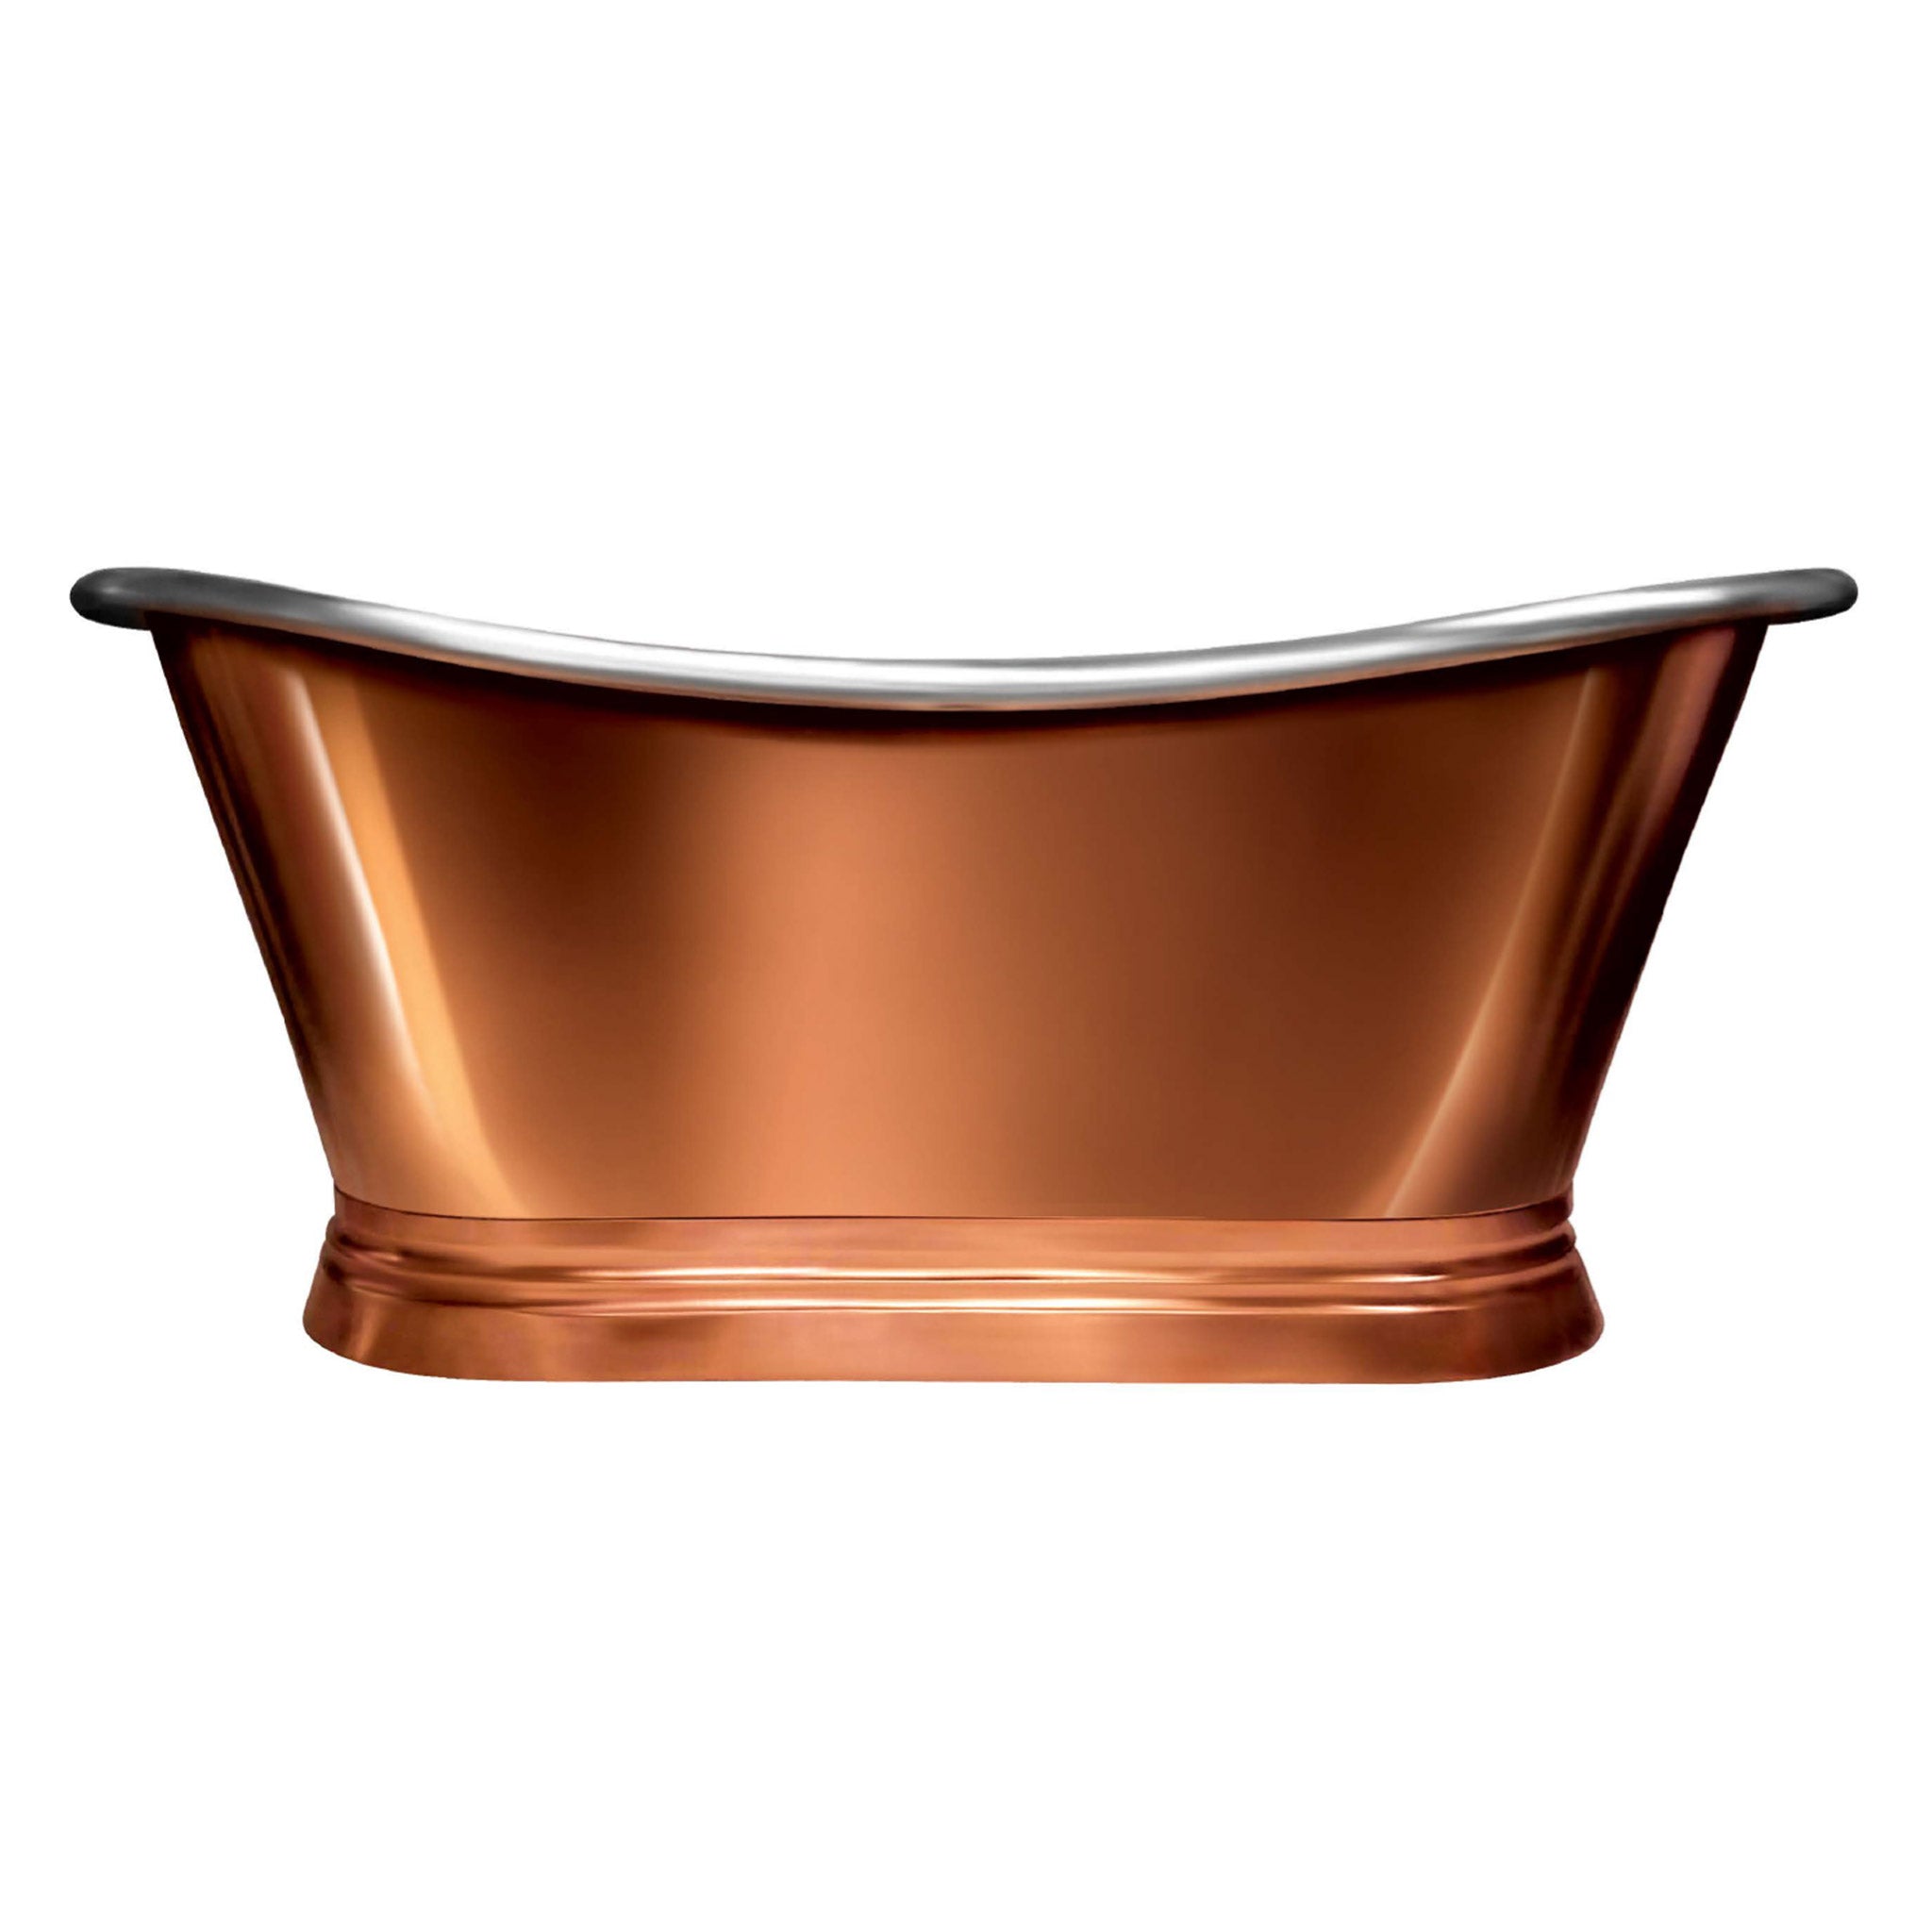 BC Designs Copper Nickel Double Ended Roll Top Bath